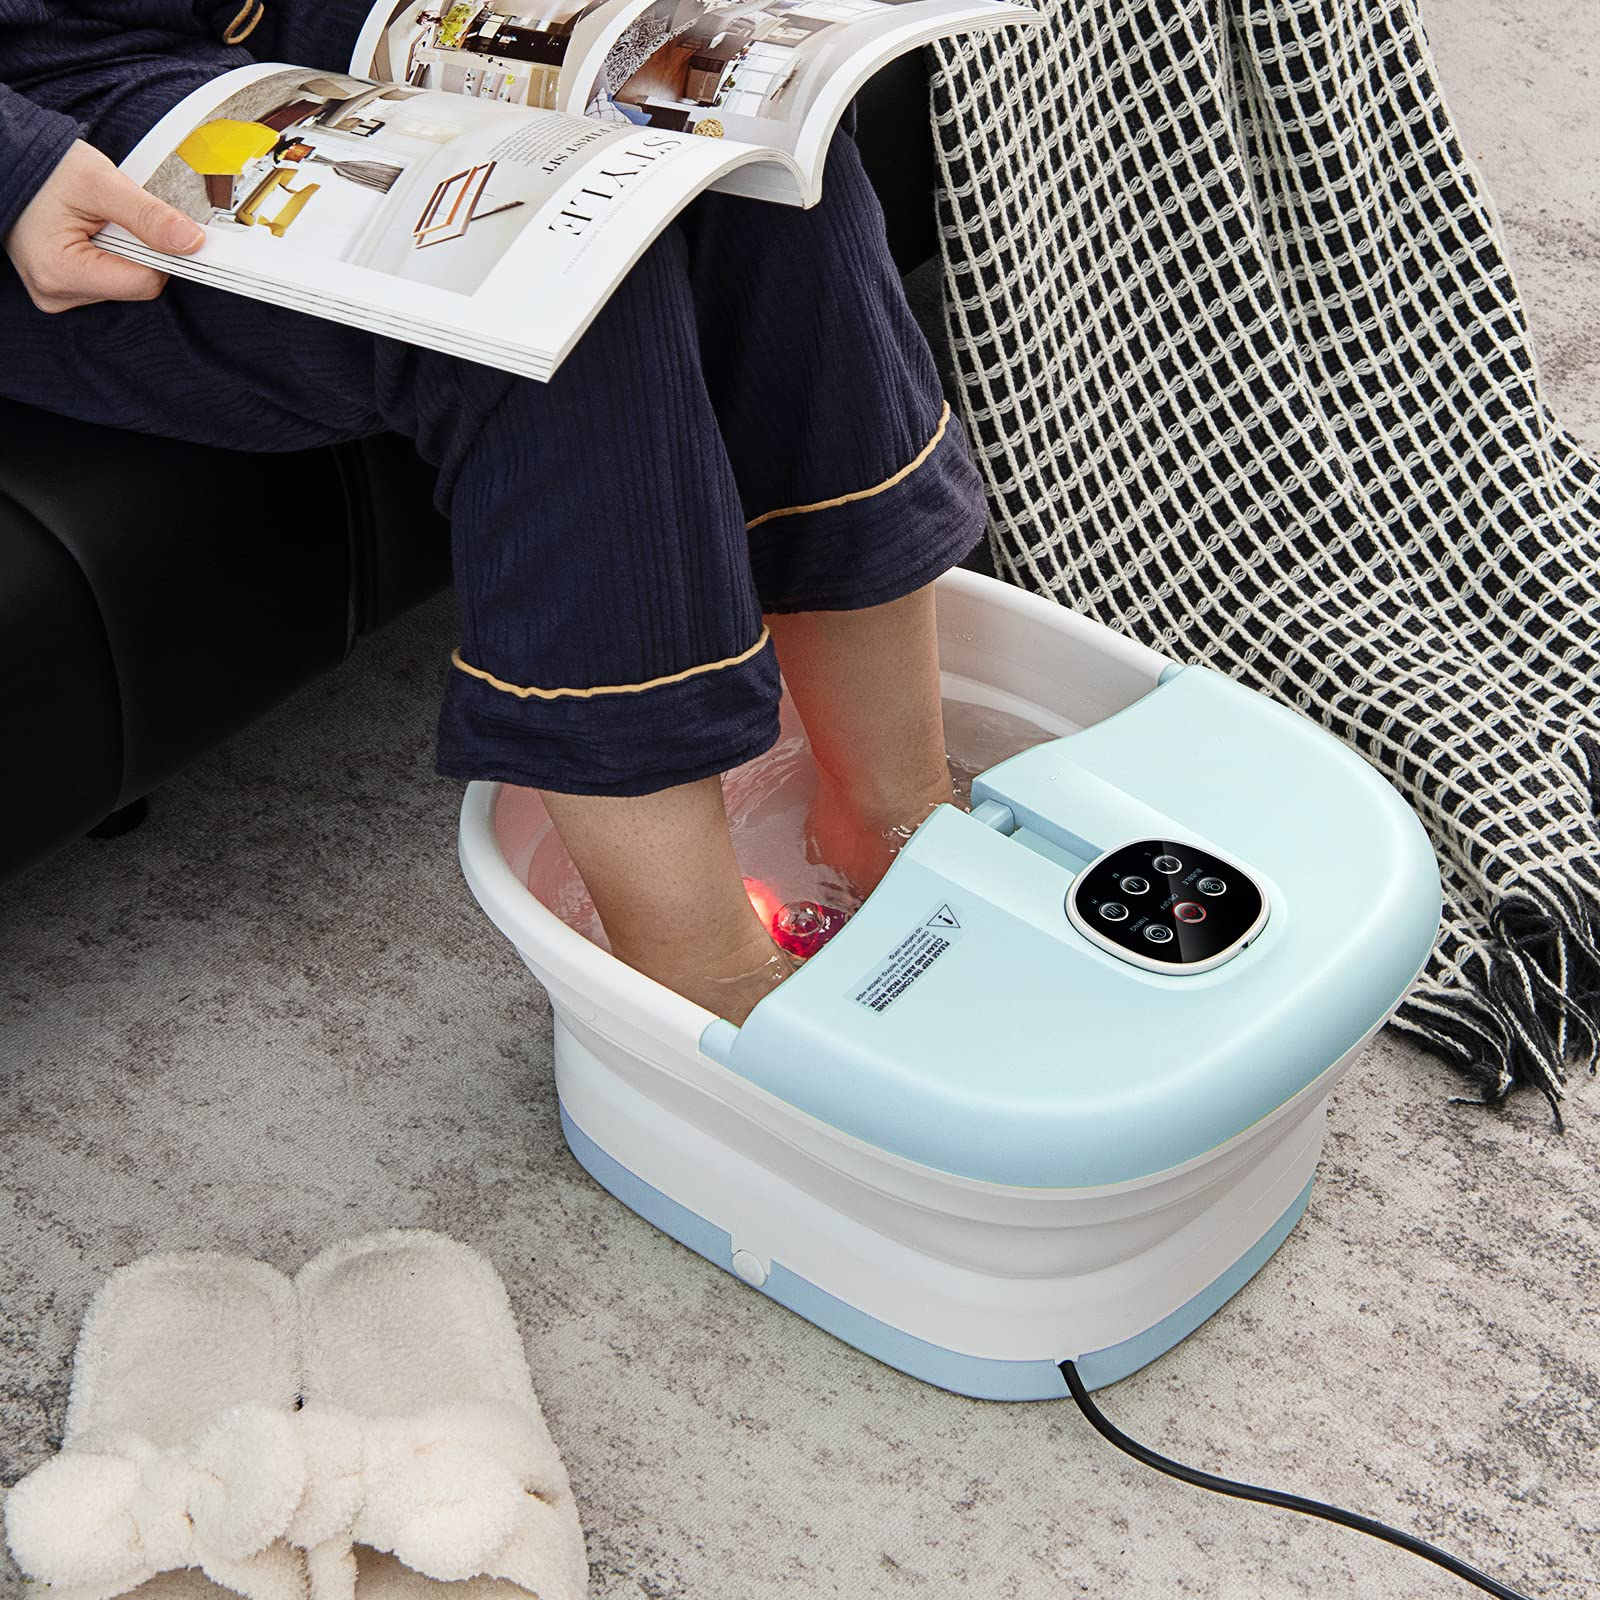 Collapsible Foot Spa Tub w/Remote Control | Pedicure Foot Spa